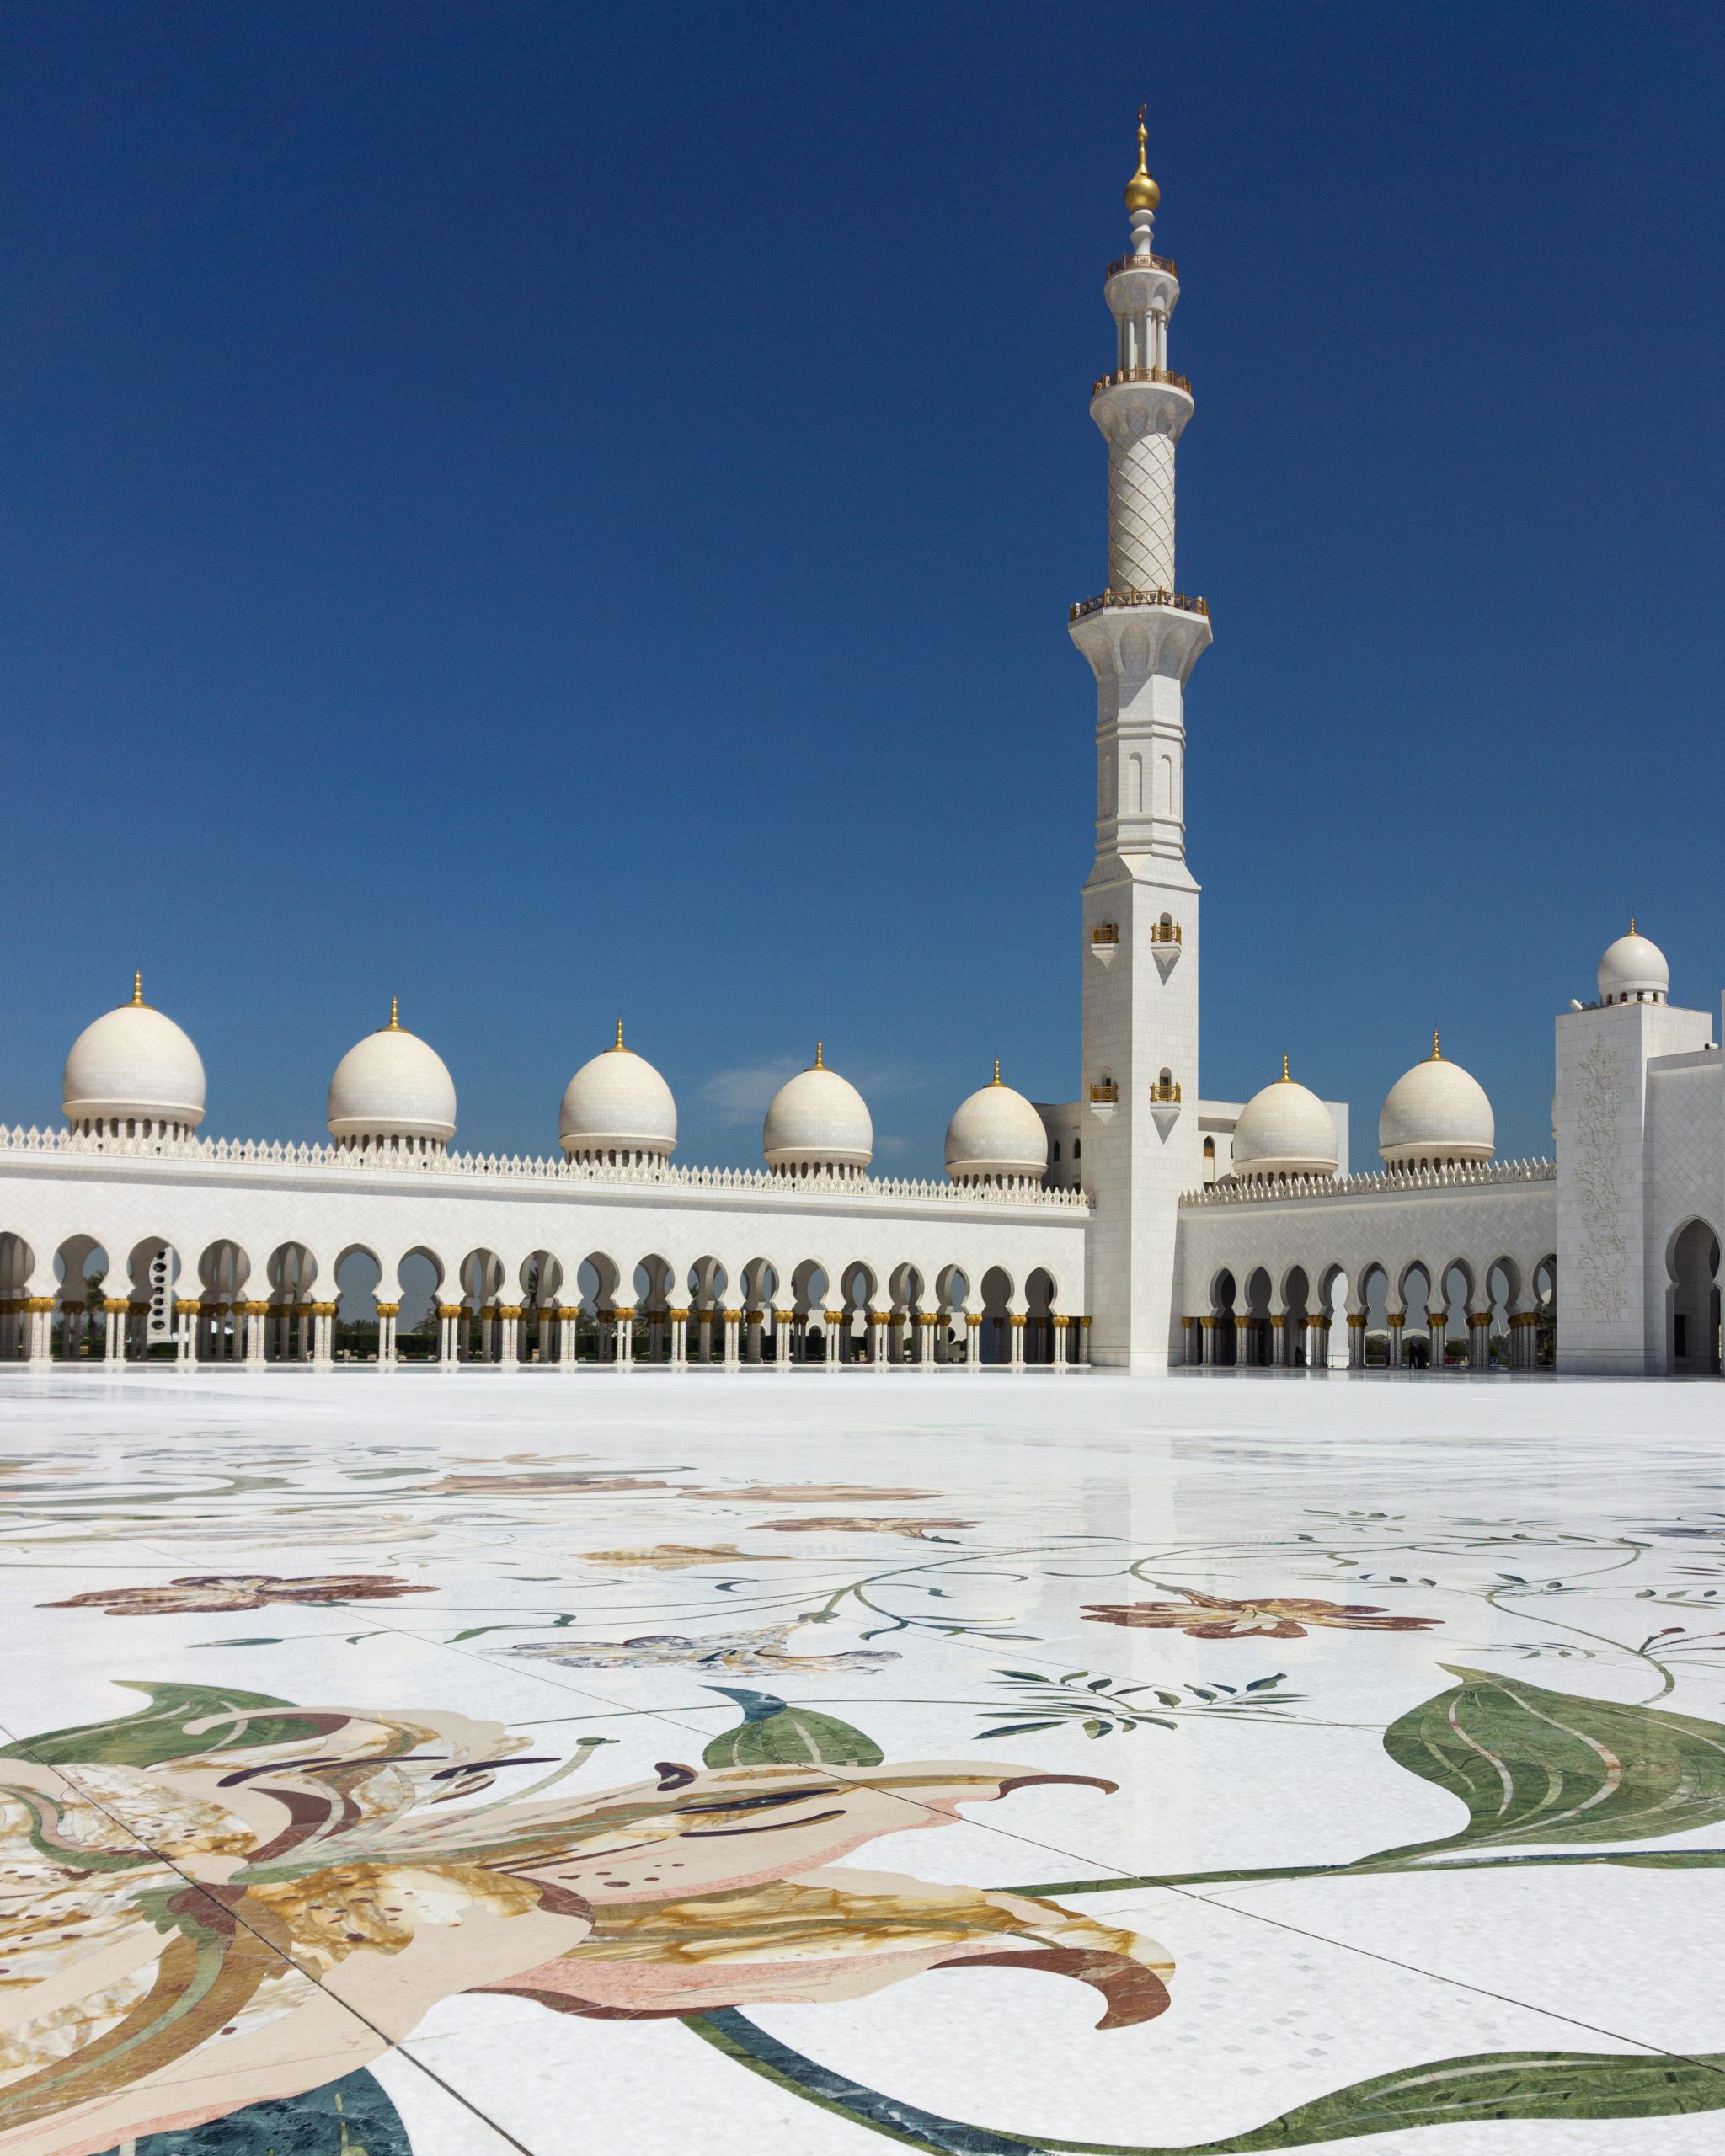 Detailed floor designs and impressive architecture at the Sheikh Zayed Grand Mosque in Abu Dhabi